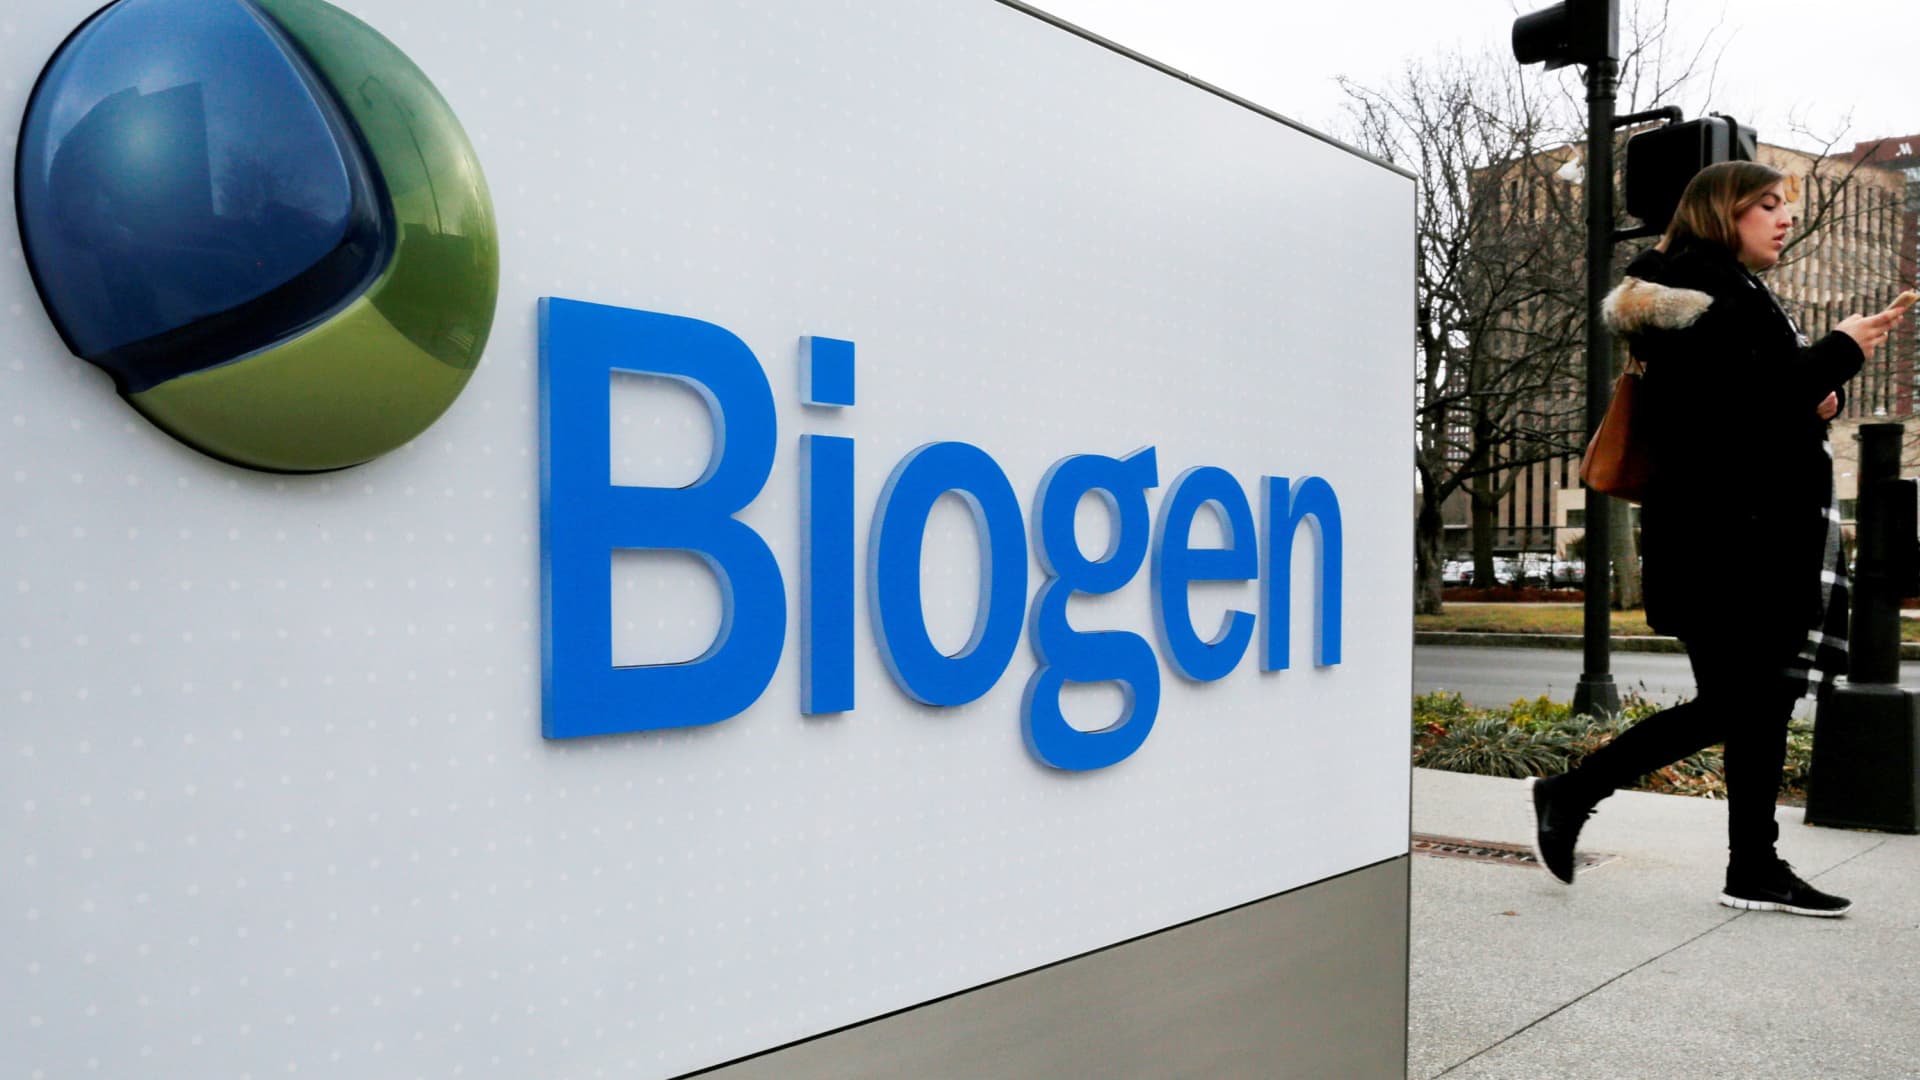 Biogen to pay $900 million to settle allegations it paid